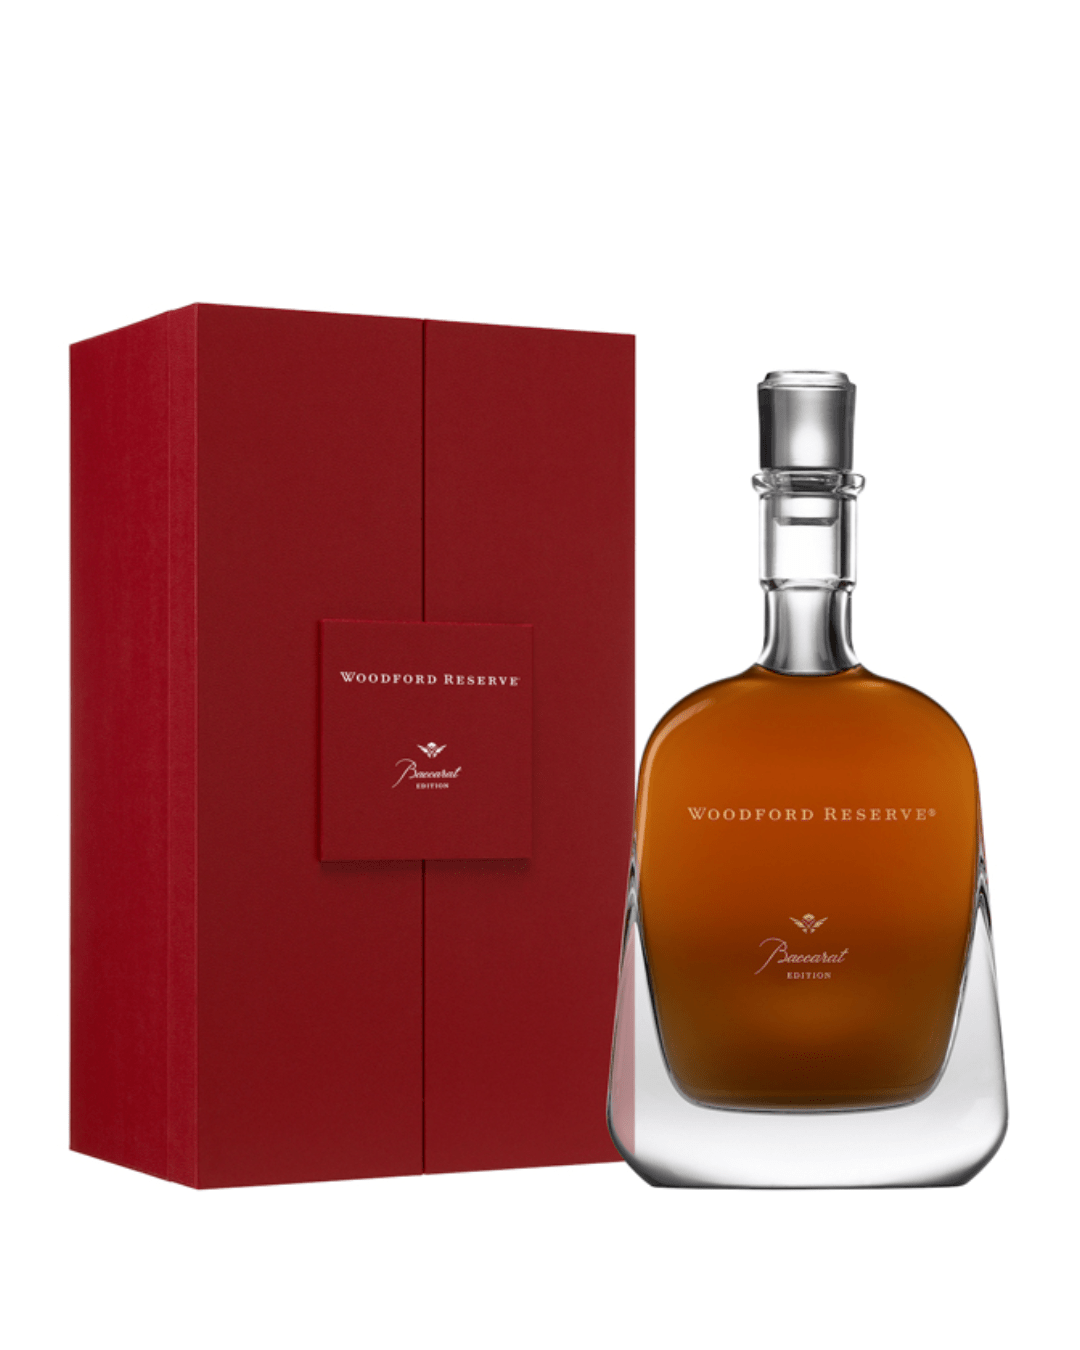 Woodford Reserve Baccarat Edition Bourbon Whiskey, 1 L Whisky